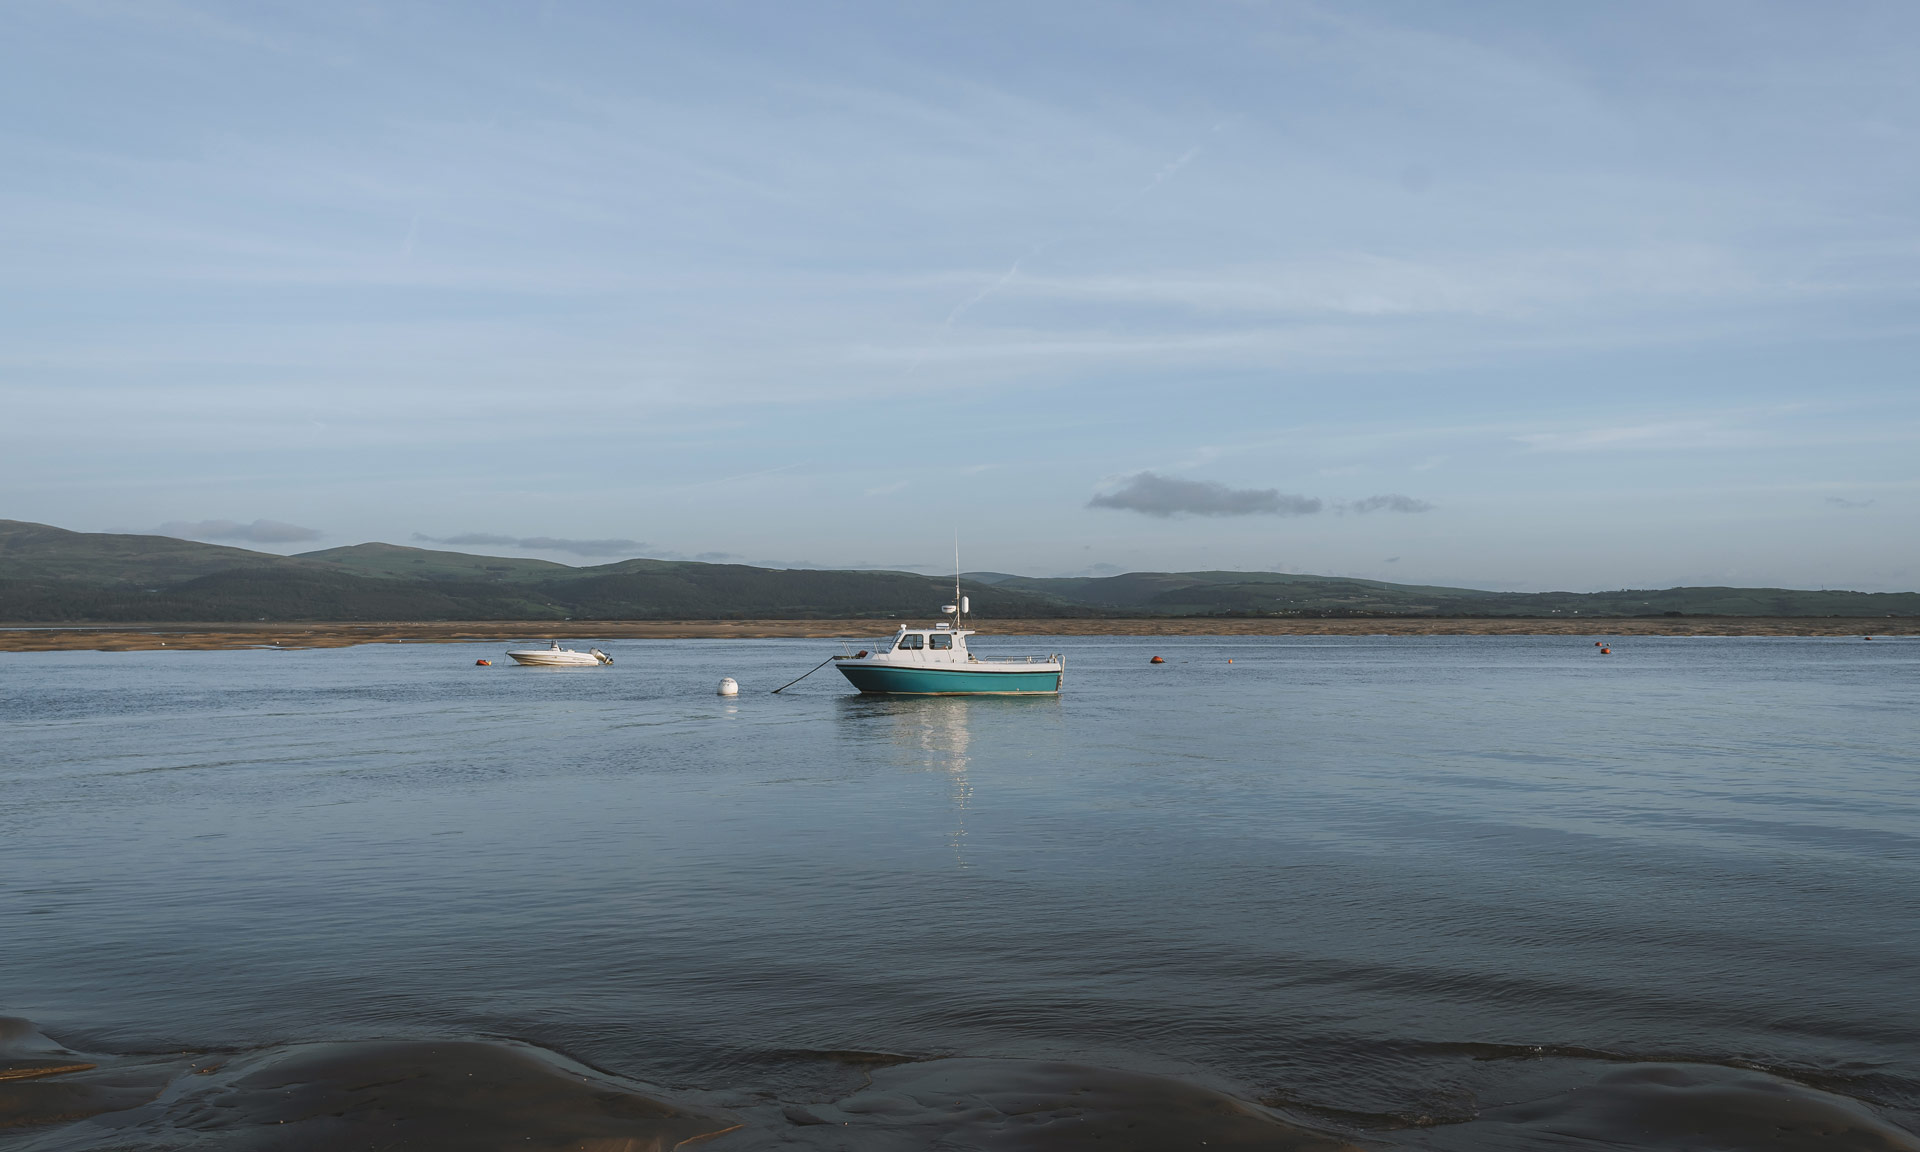 A boat floats in the calm waters of Aberdyfi